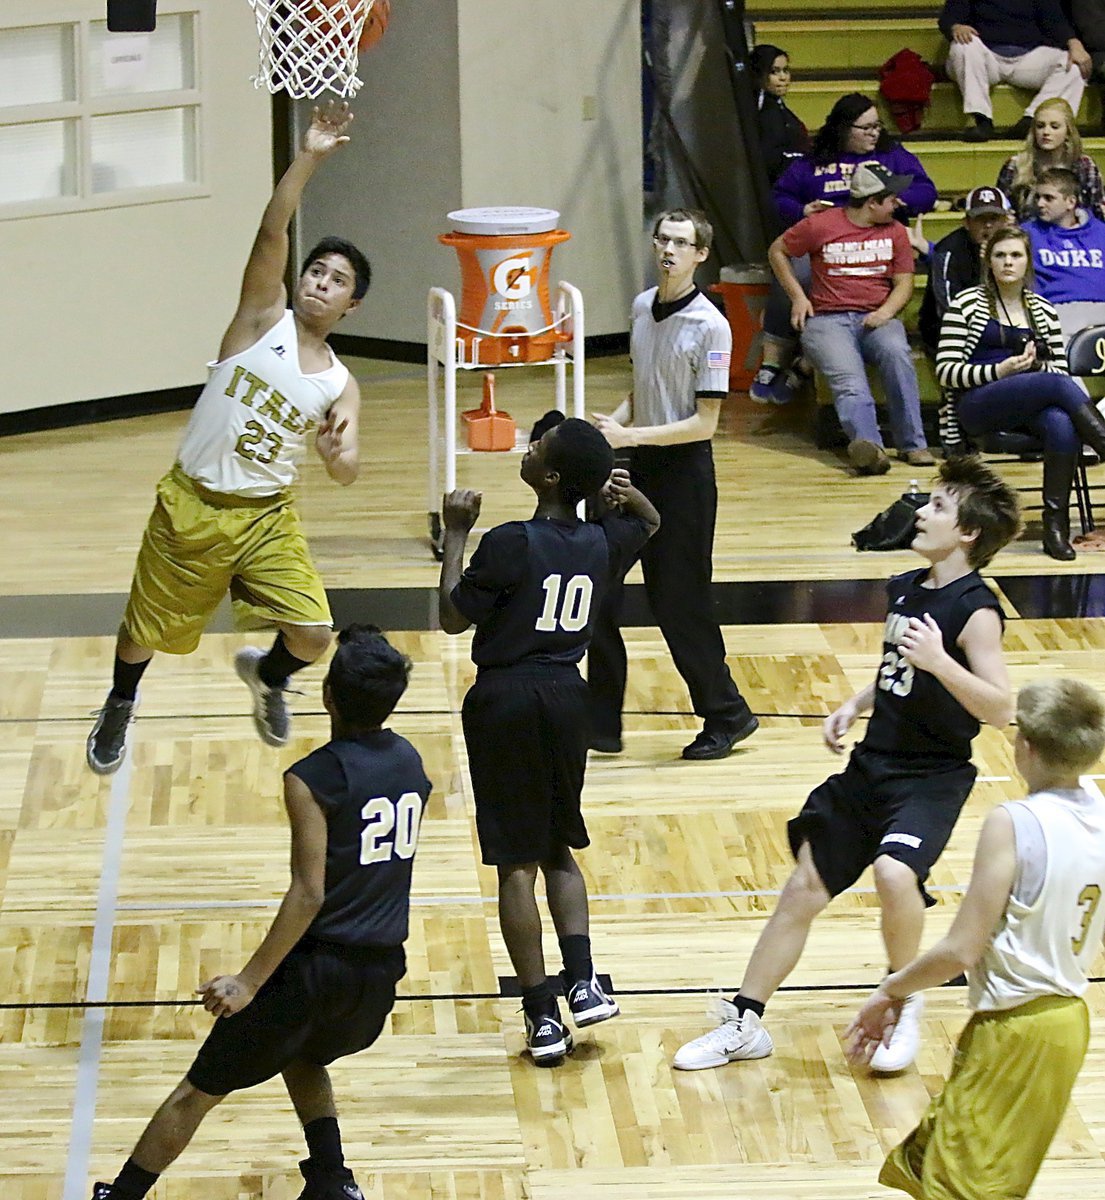 Image: Italy 8th Grader Aaron Franco(23) scores after a strong drive to the basket.